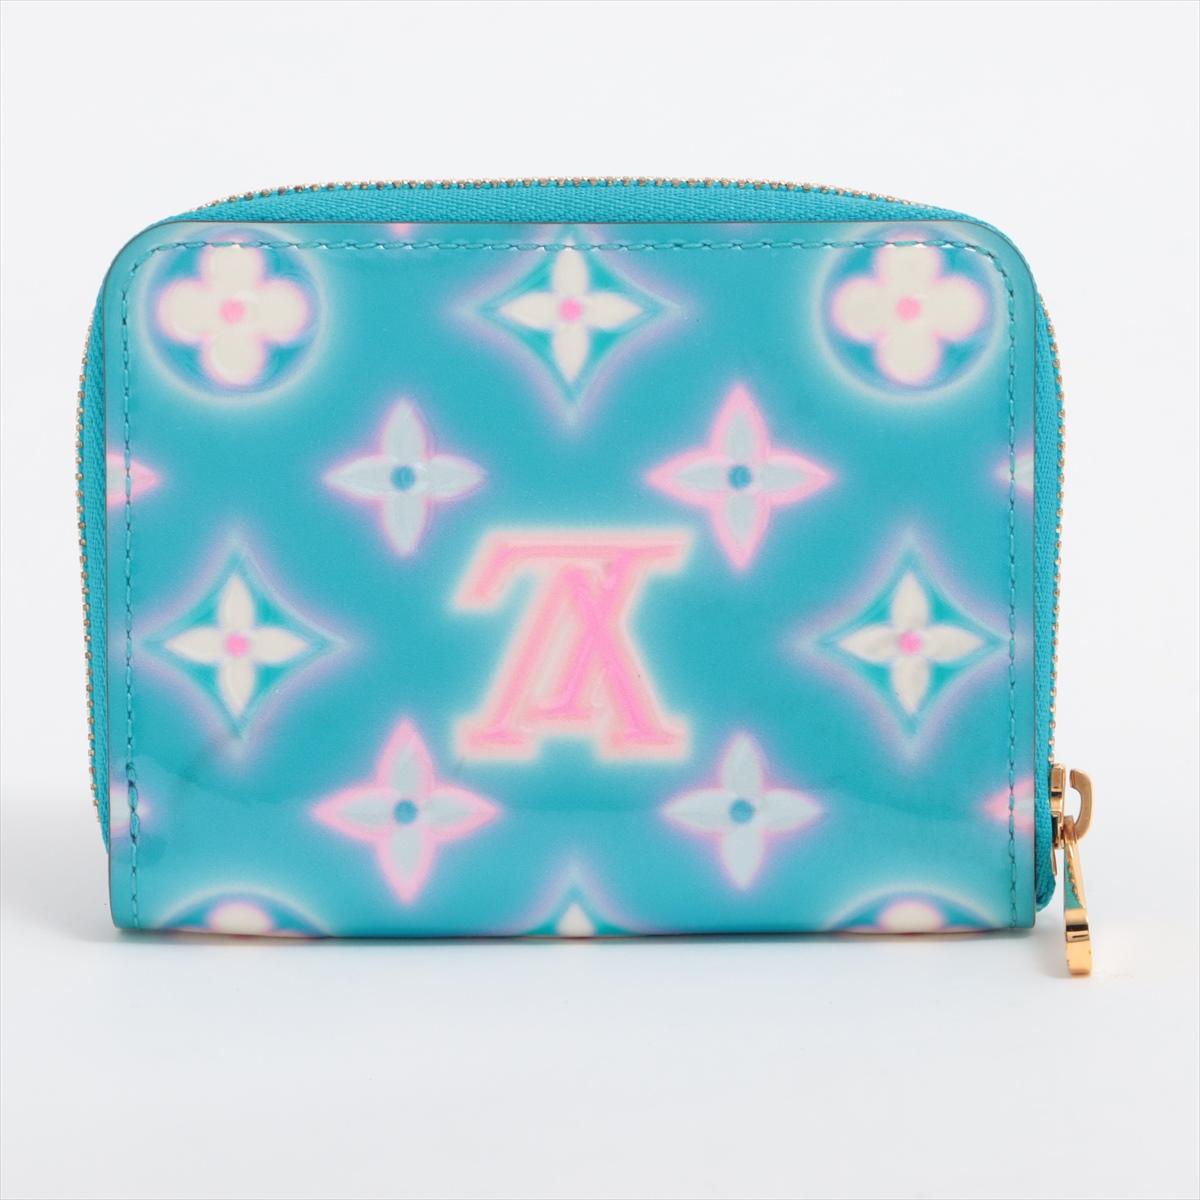 Louis Vuitton Vernis Zippy Coin Purse Baby Blue Neon x Pink In Good Condition For Sale In Indianapolis, IN